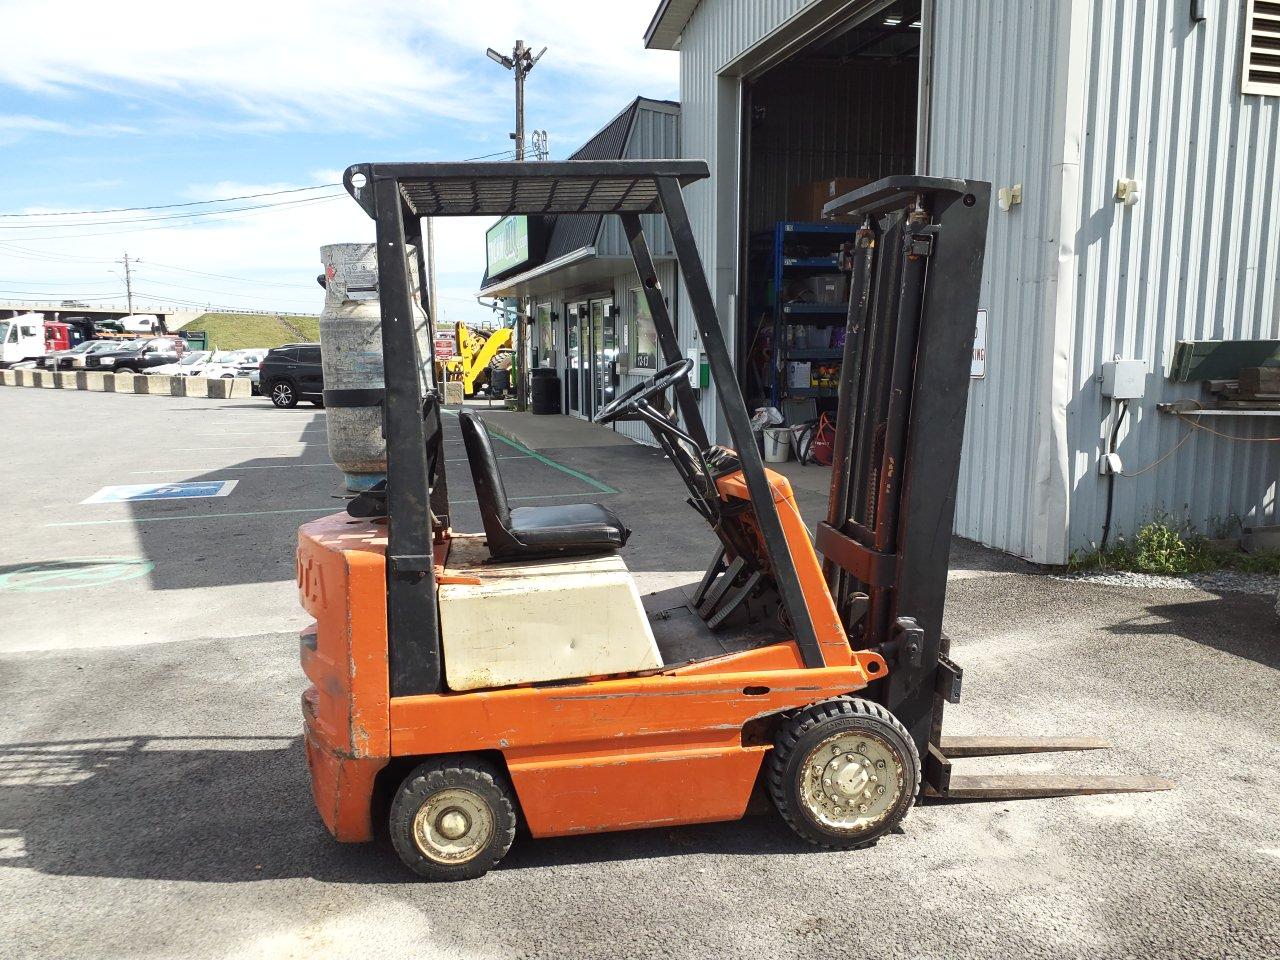 A 40-3FGC15 Toyota forklift parked outside a workshop in broad daylight